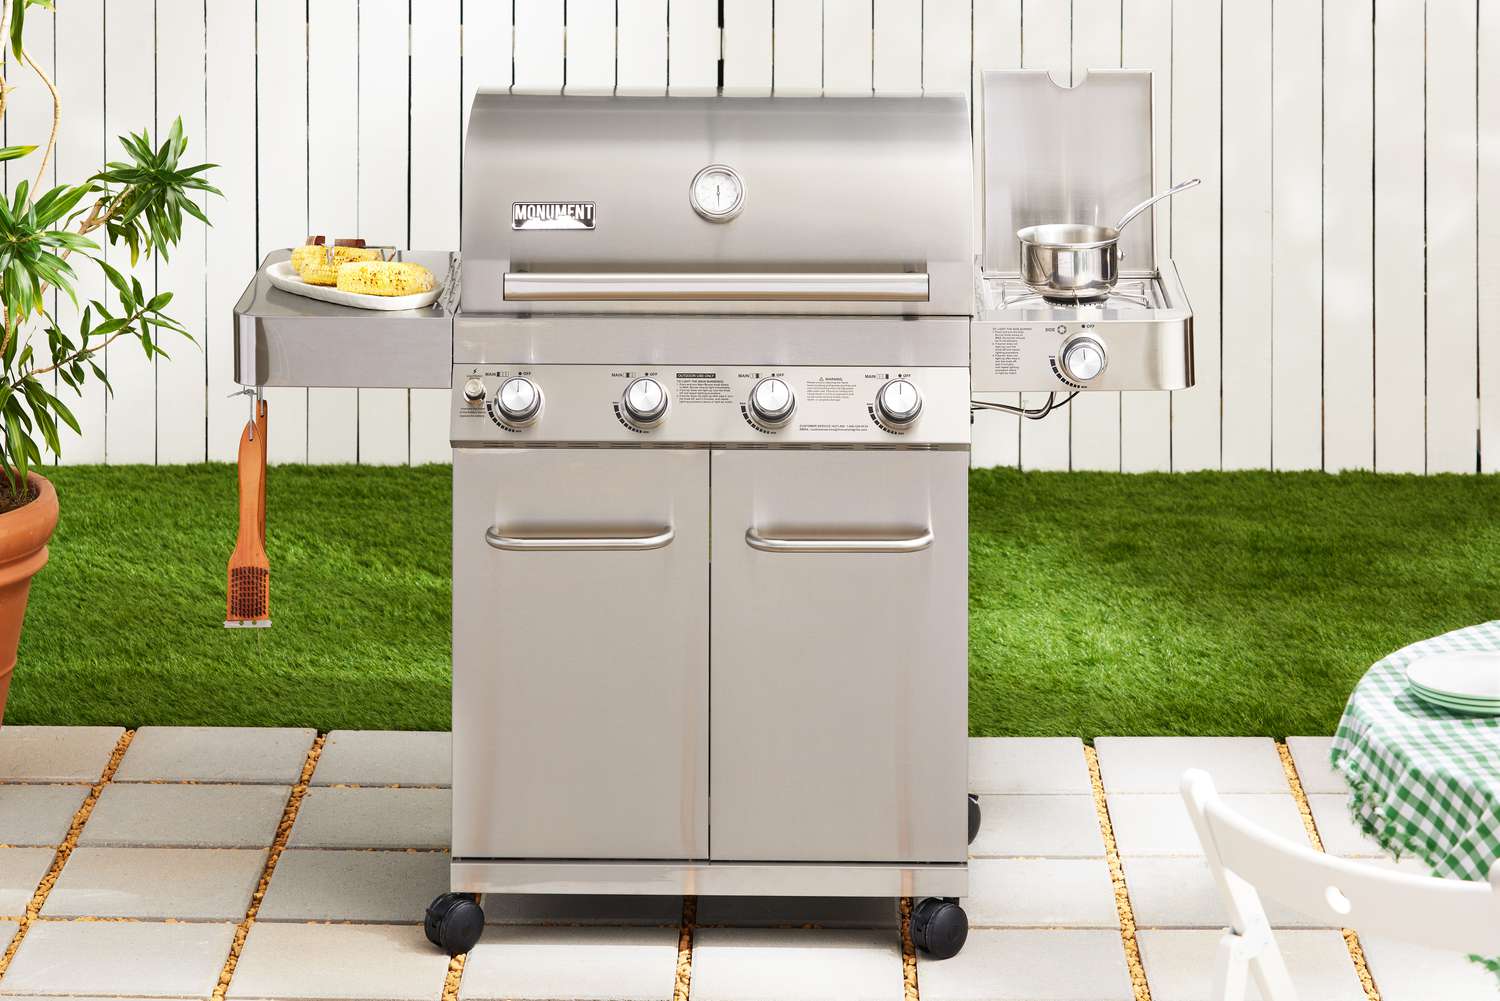 Monument Grills Stainless 4-Burner Propane Gas Grill displayed on pavers